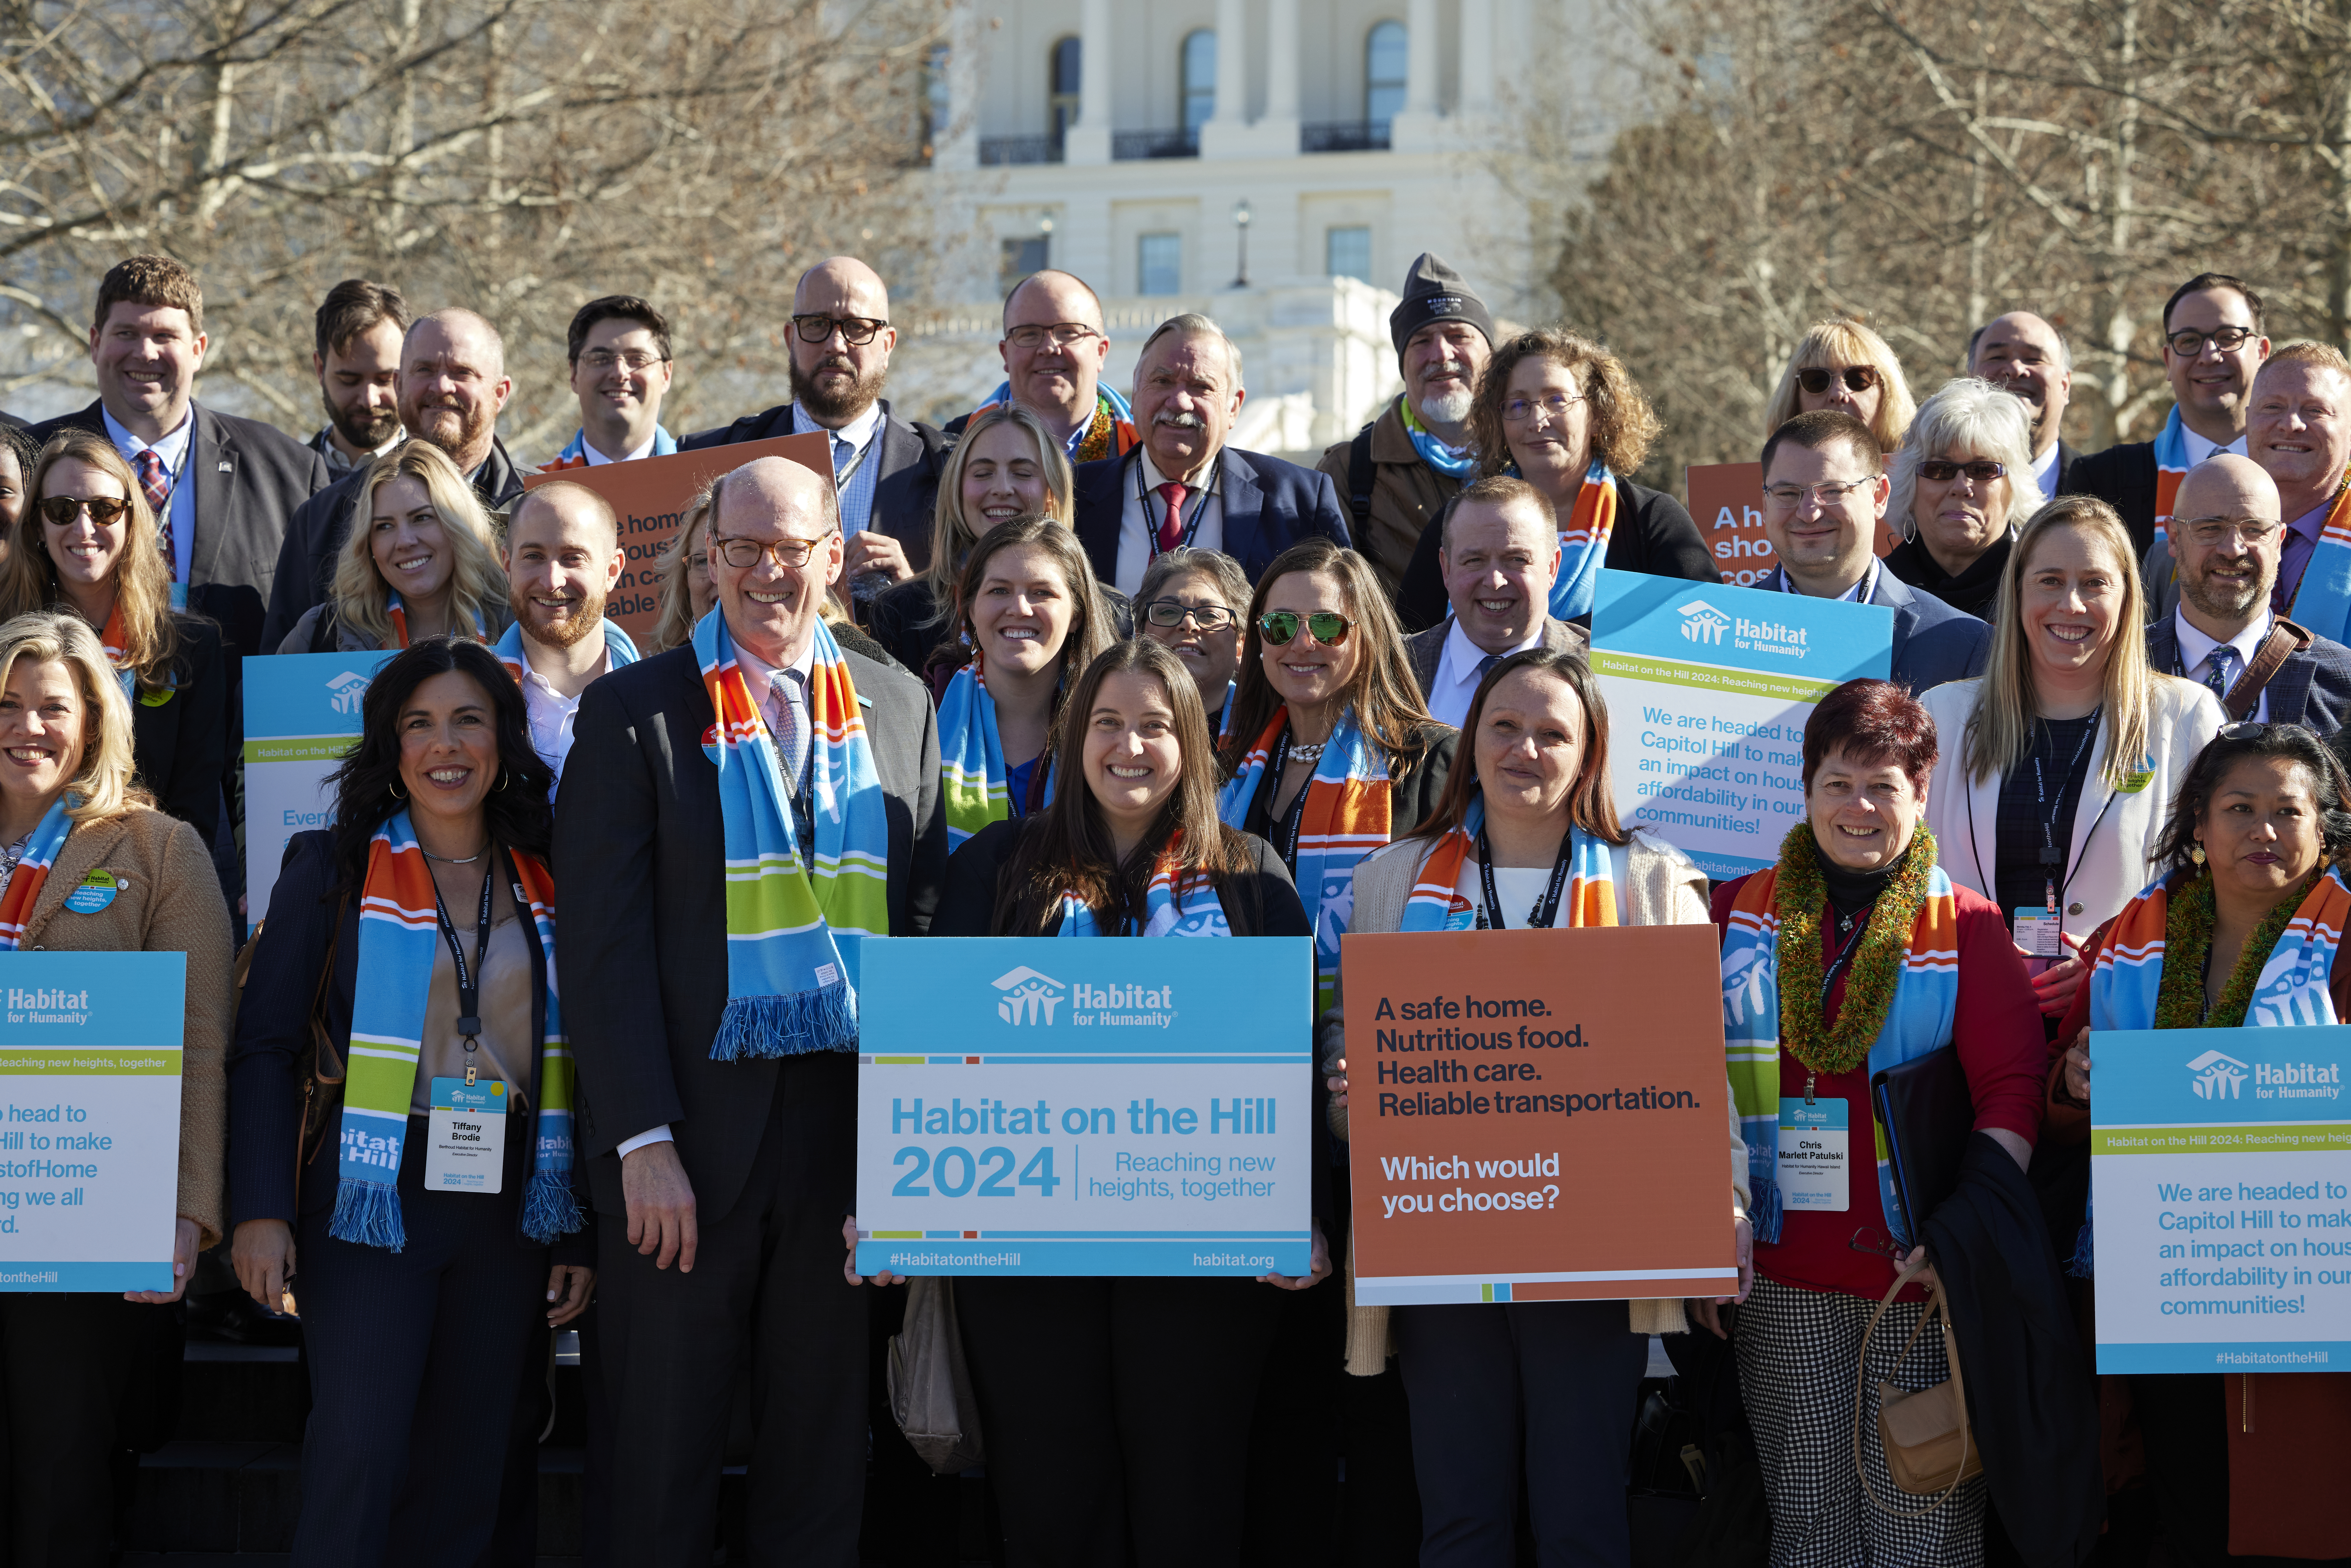 Habitat representatives stand in front of the Capitol building